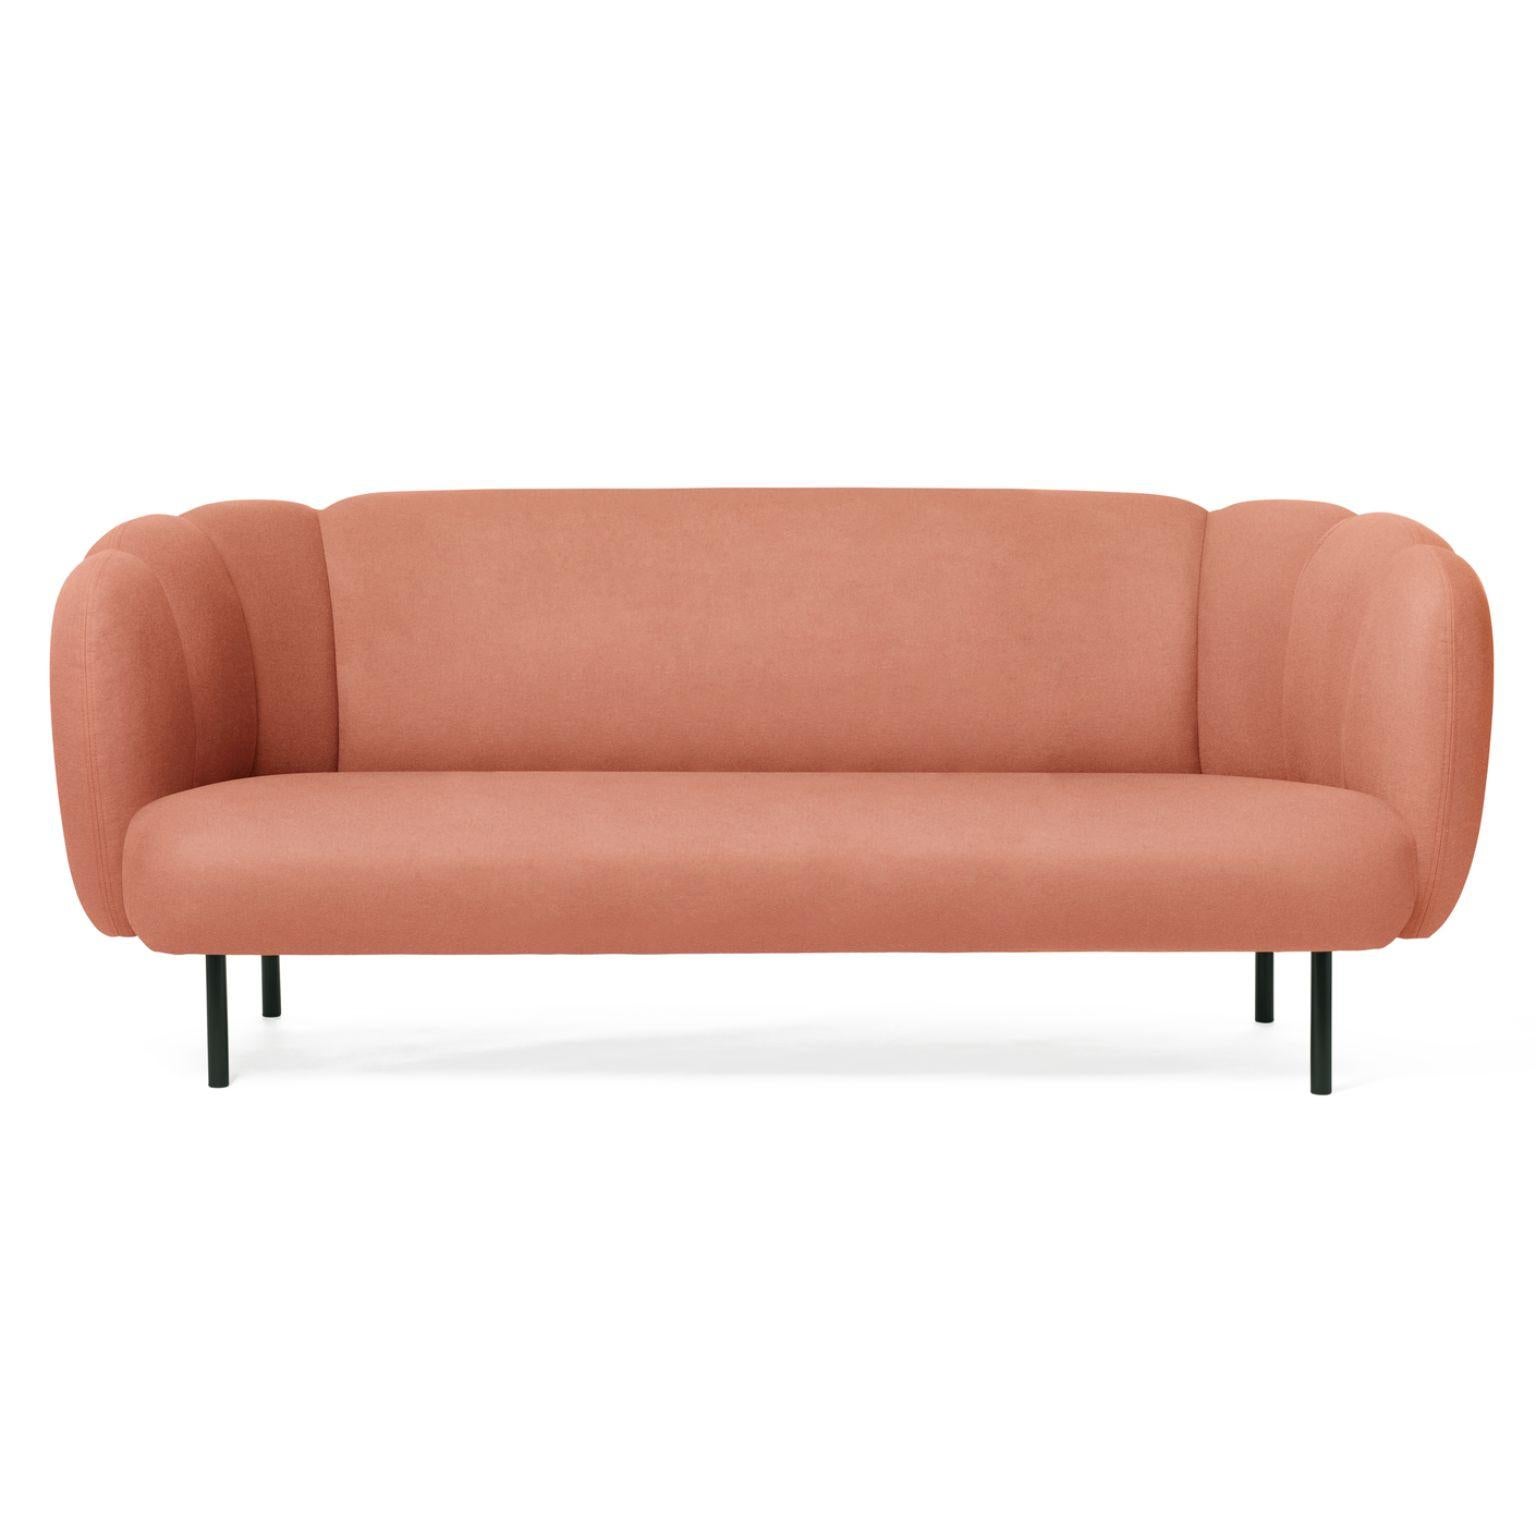 Caper 3 seater with stitches blush by Warm Nordic
Dimensions: D200 x W84 x H 80 cm
Material: Textile upholstery, wooden frame, powder coated black steel legs.
Weight: 55.5 kg
Also available in different colours and finishes.

An elegant sofa